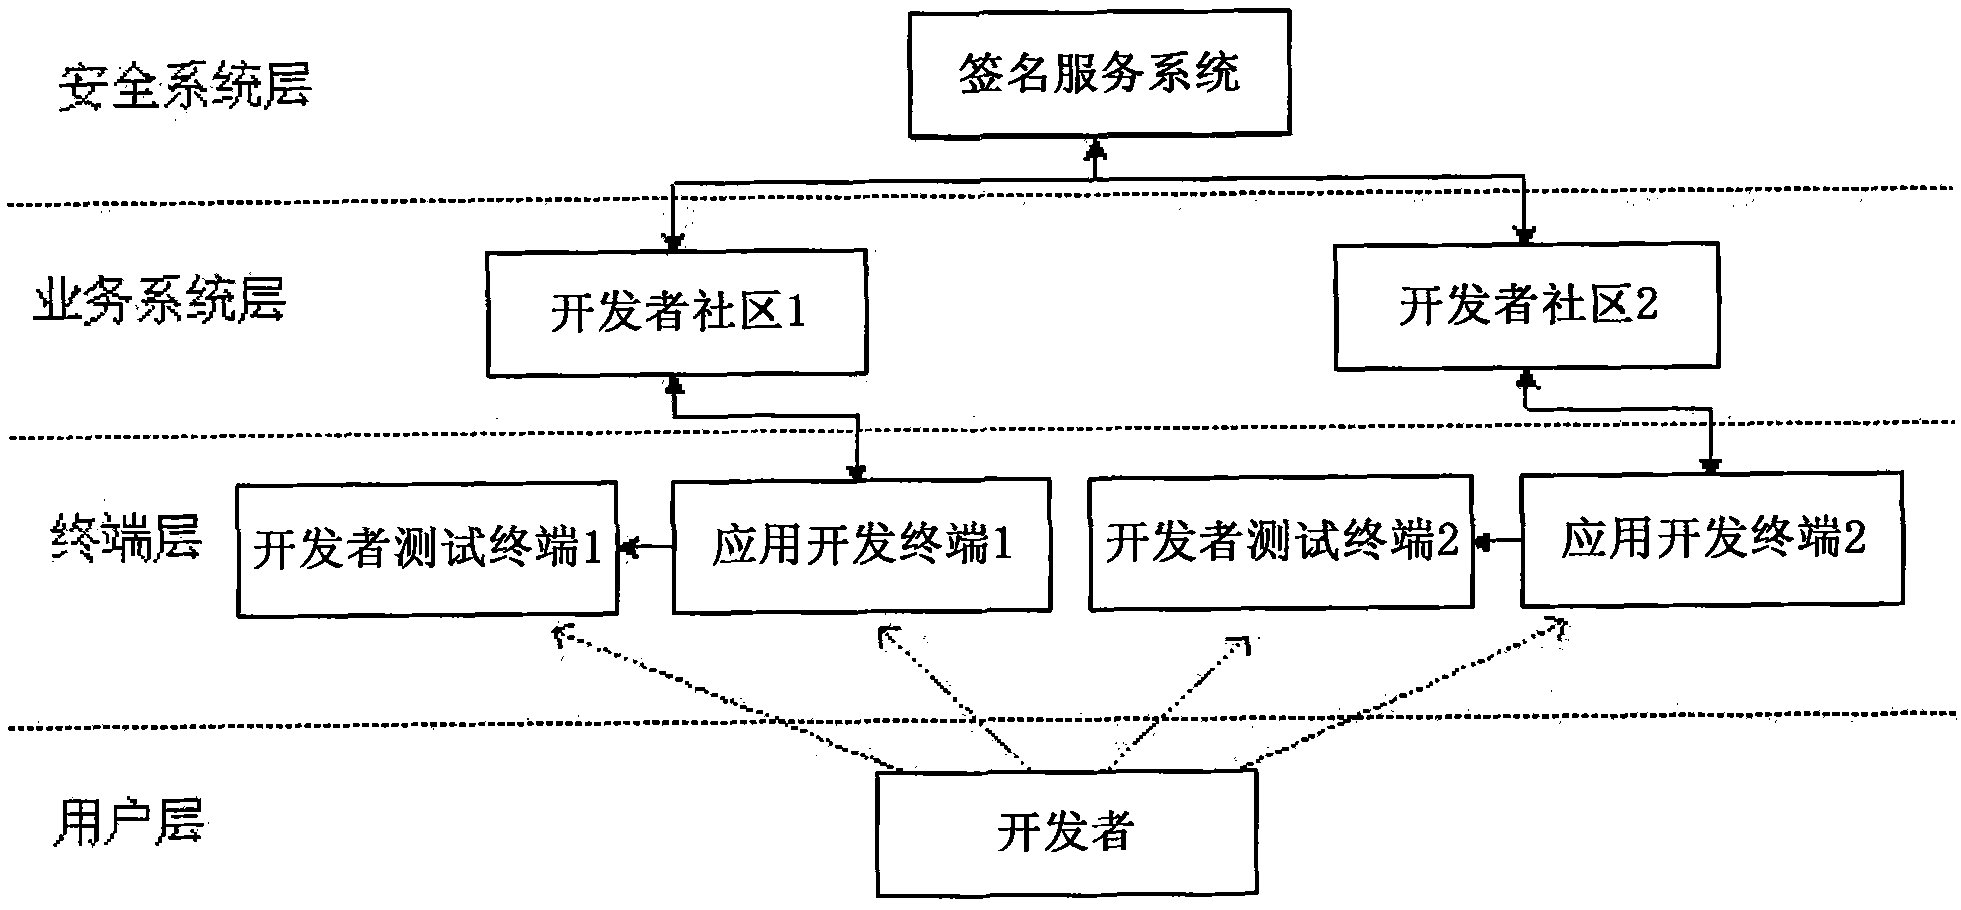 Method and system for distributing application software to terminal